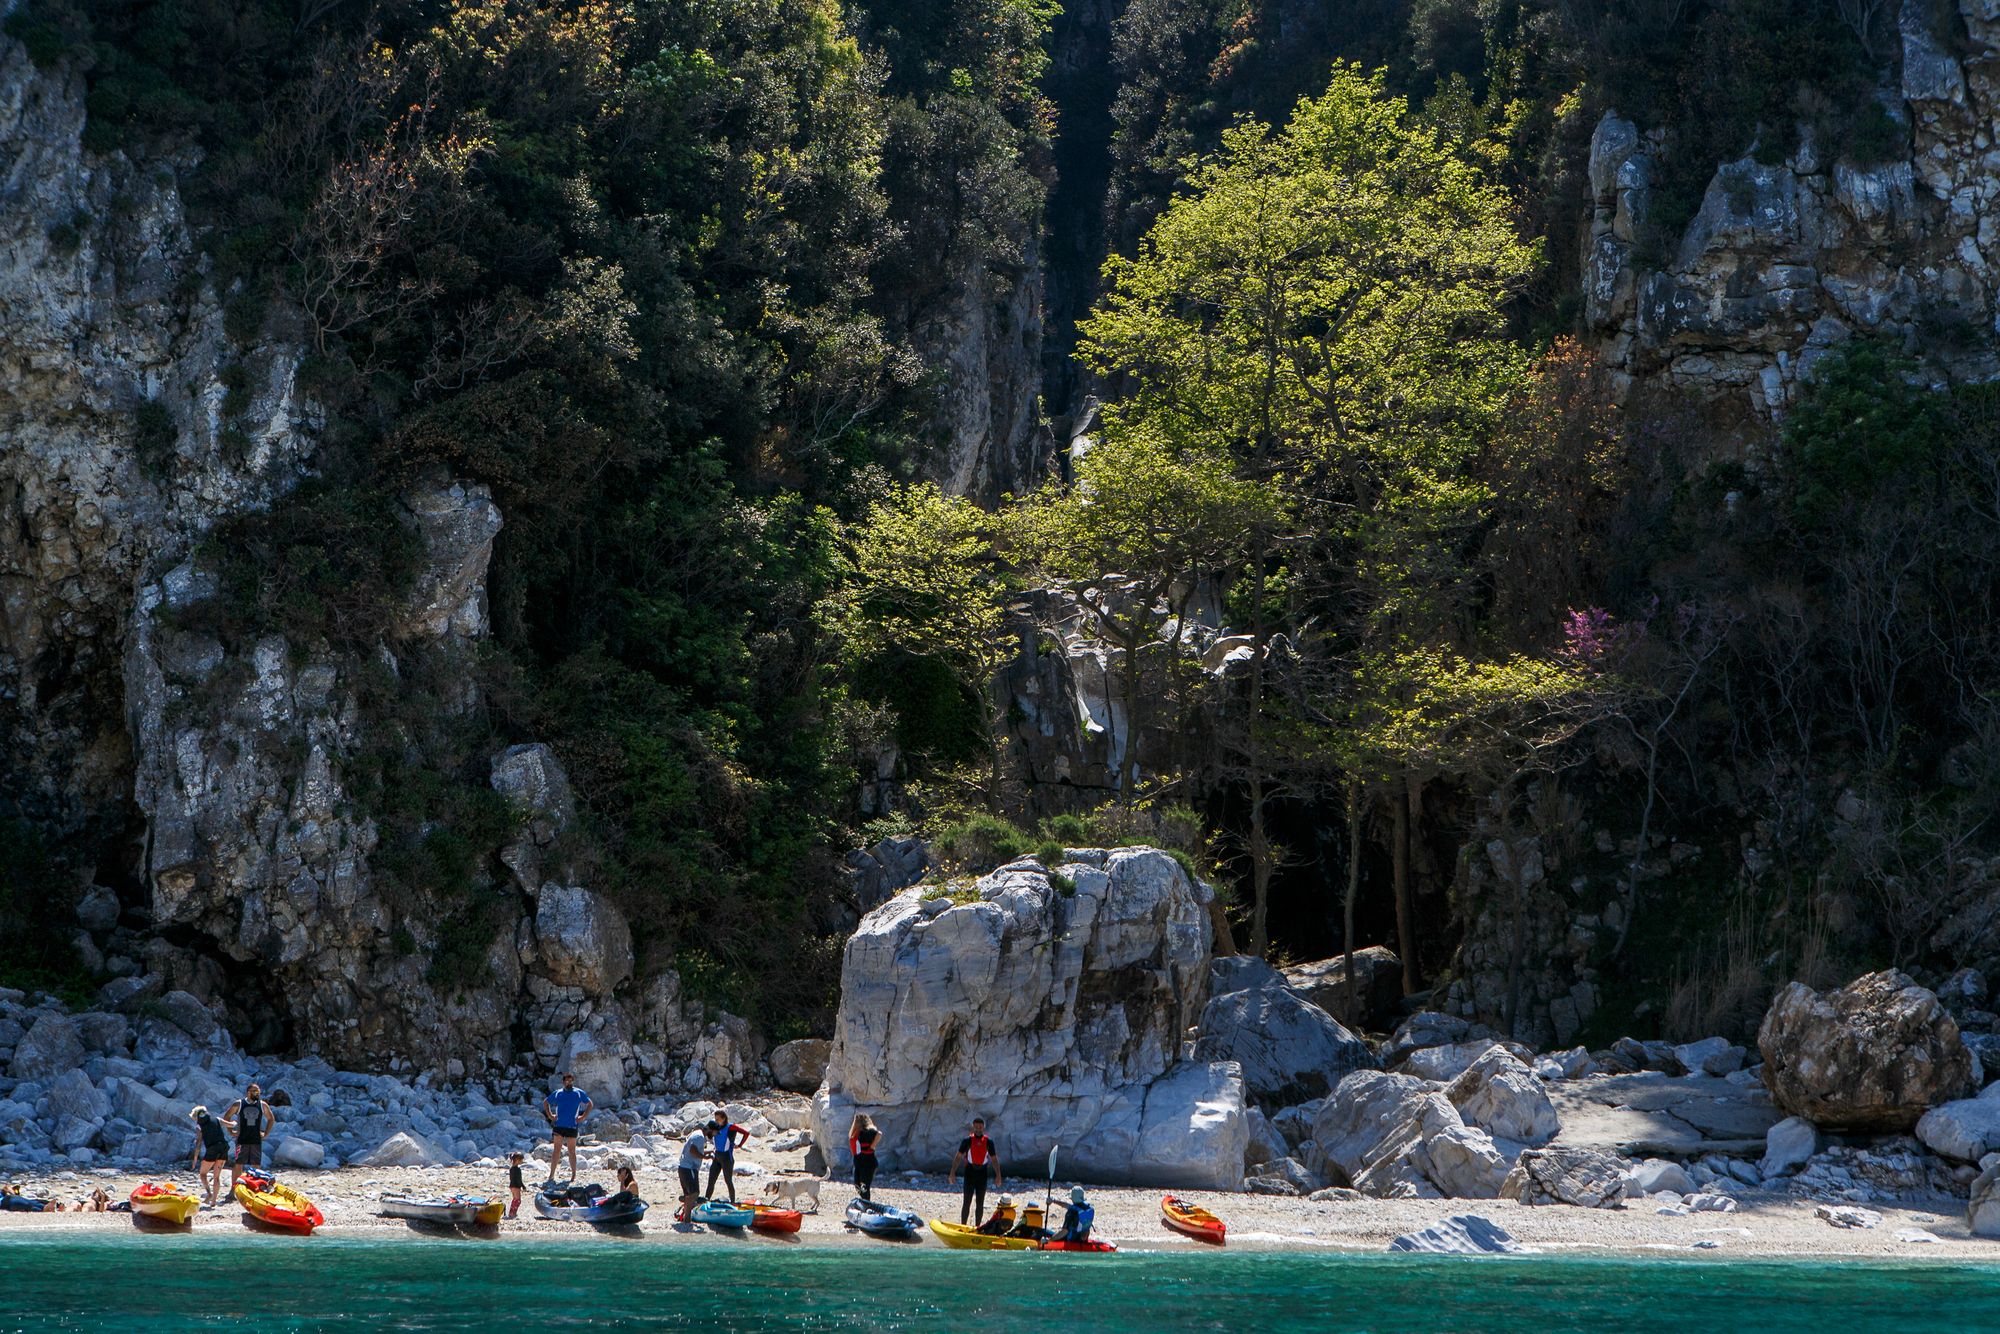 A group of kayakers on a beach with a rocky backdrop in the Pelion Peninsula, Greece.